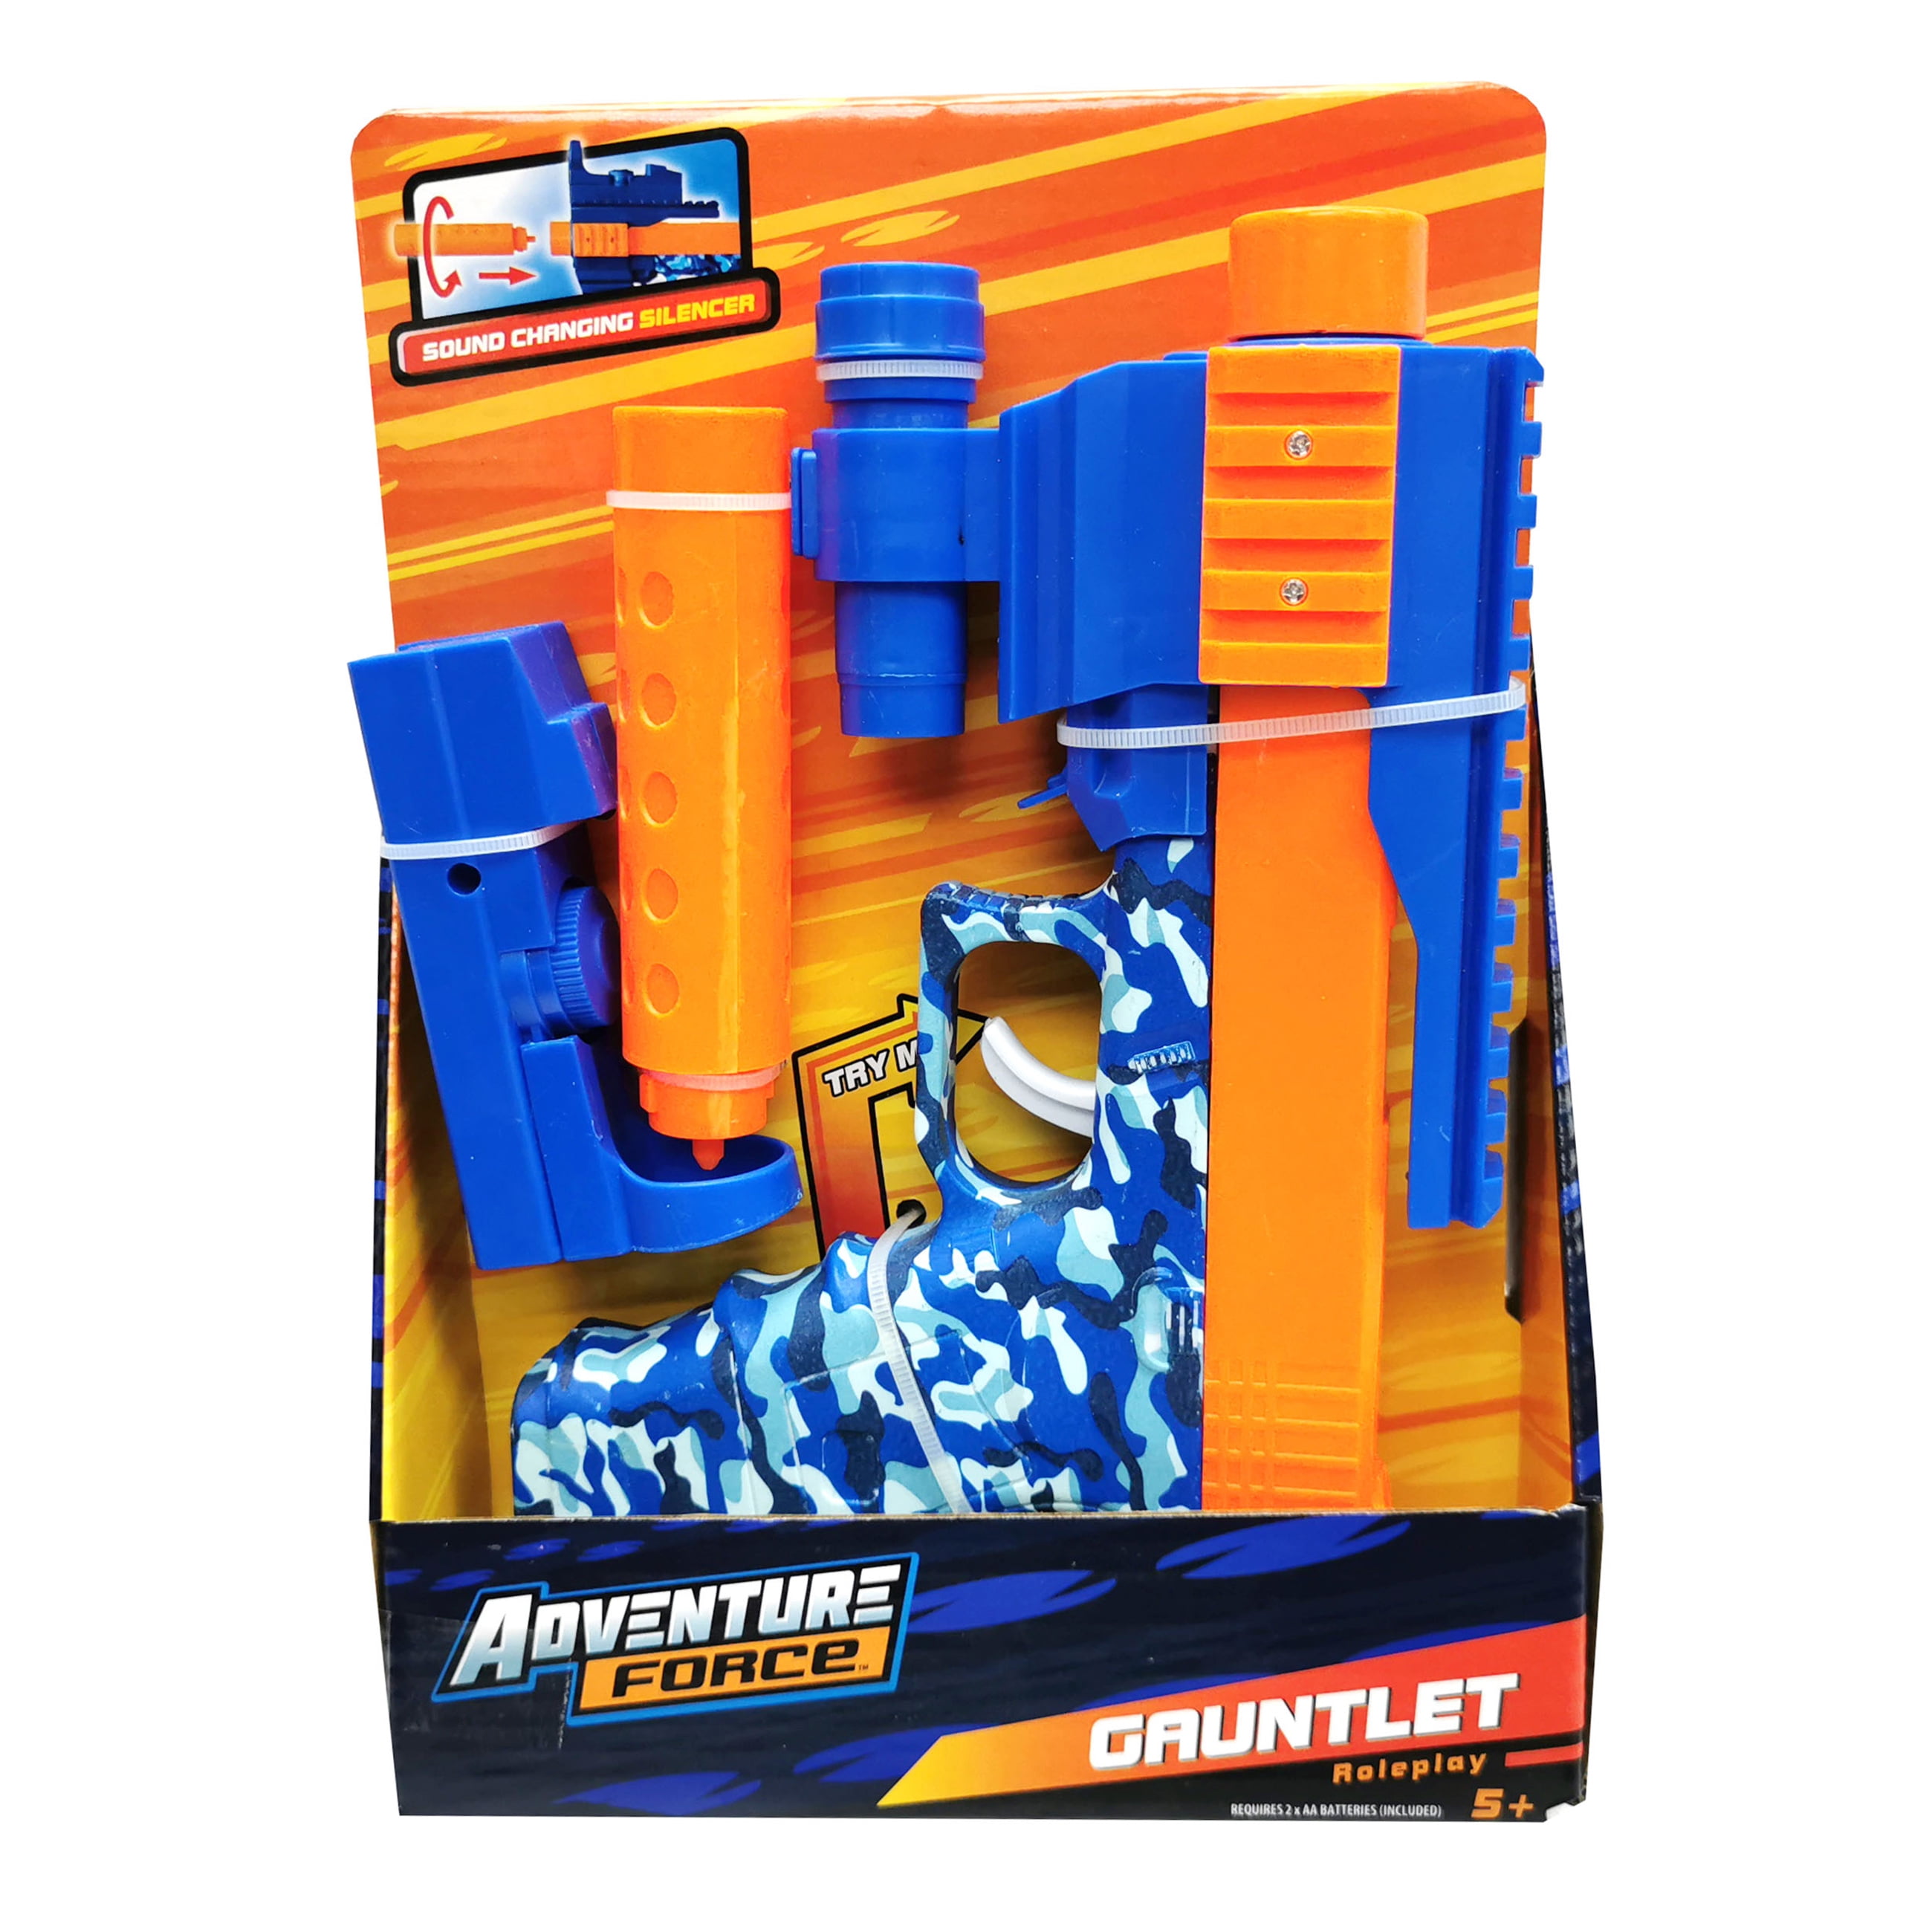 Adventure Force Gauntlet Special Force Roleplay Set with Sound